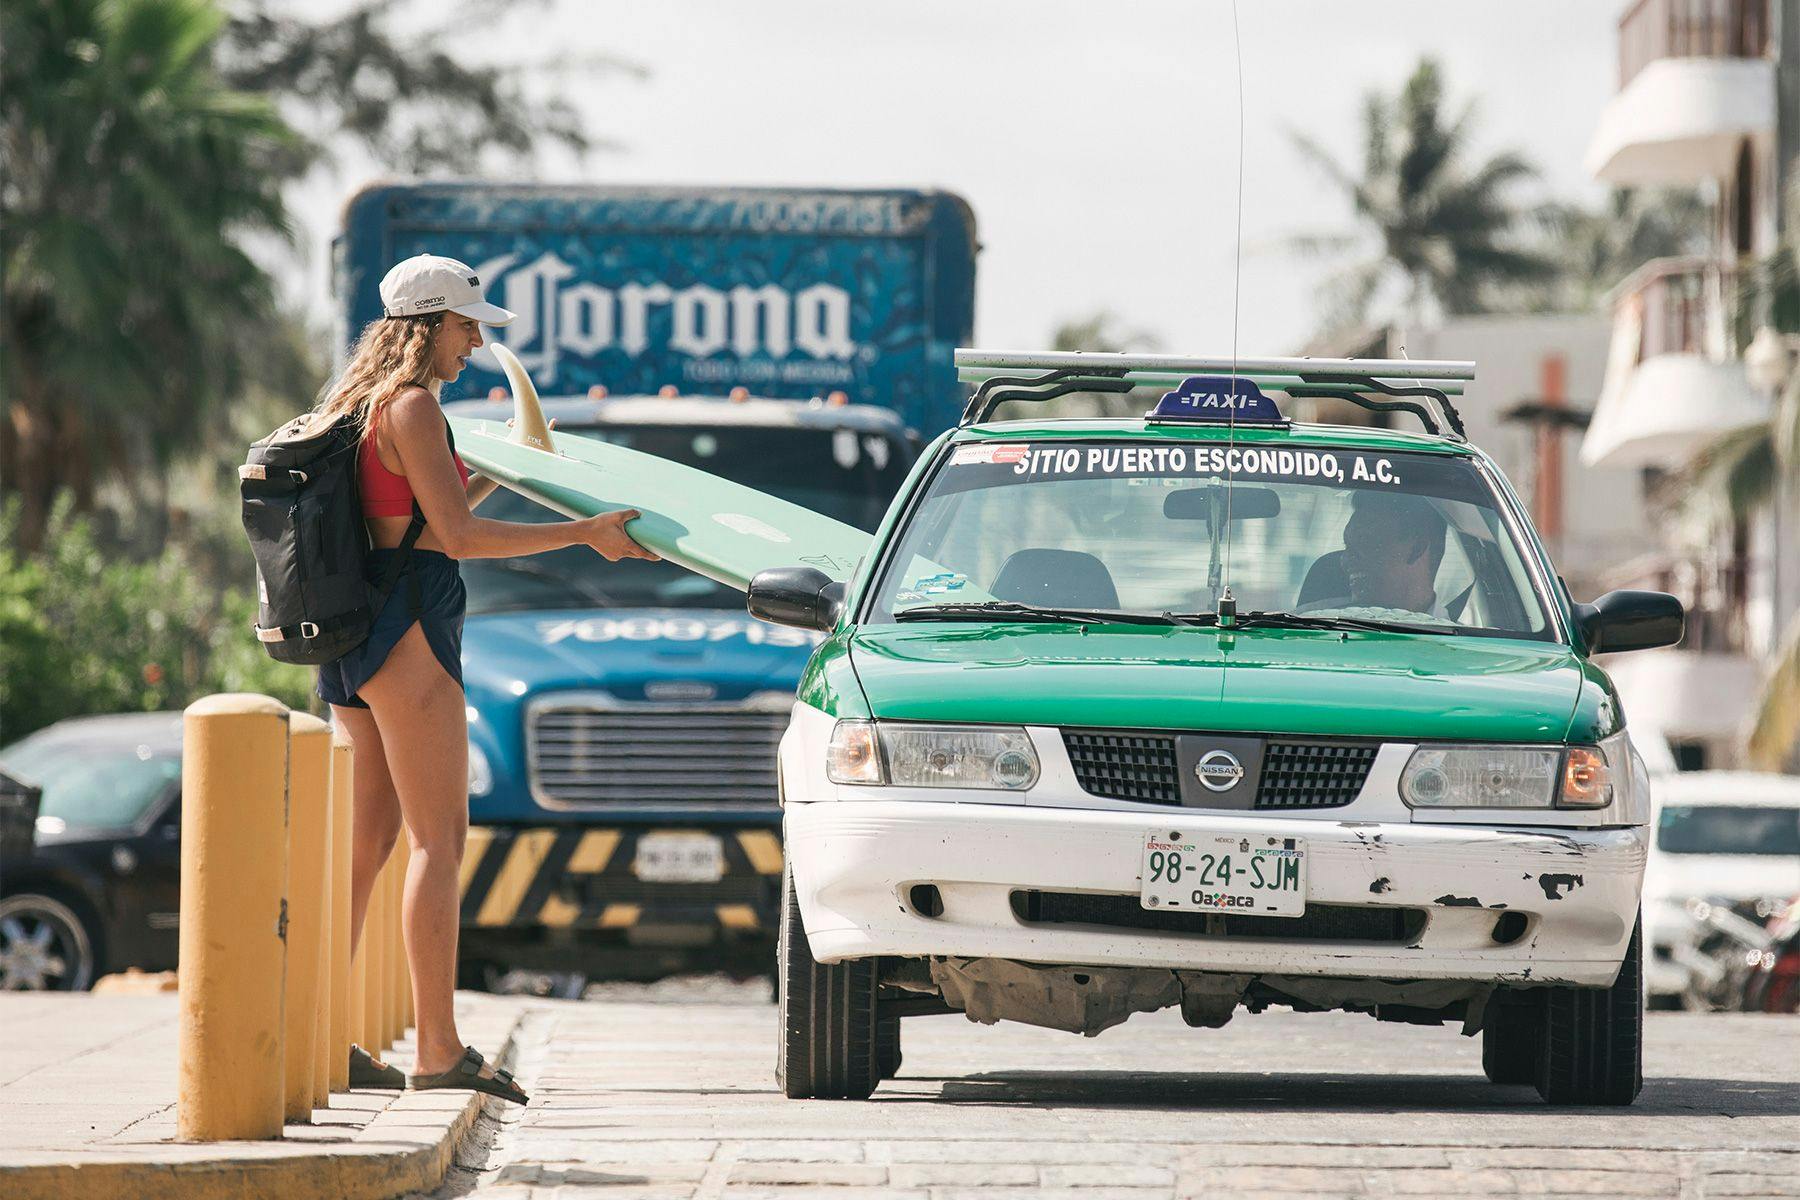 surfer loading her surfboard into a taxi in puerto excondido in mexico, by ana catarina